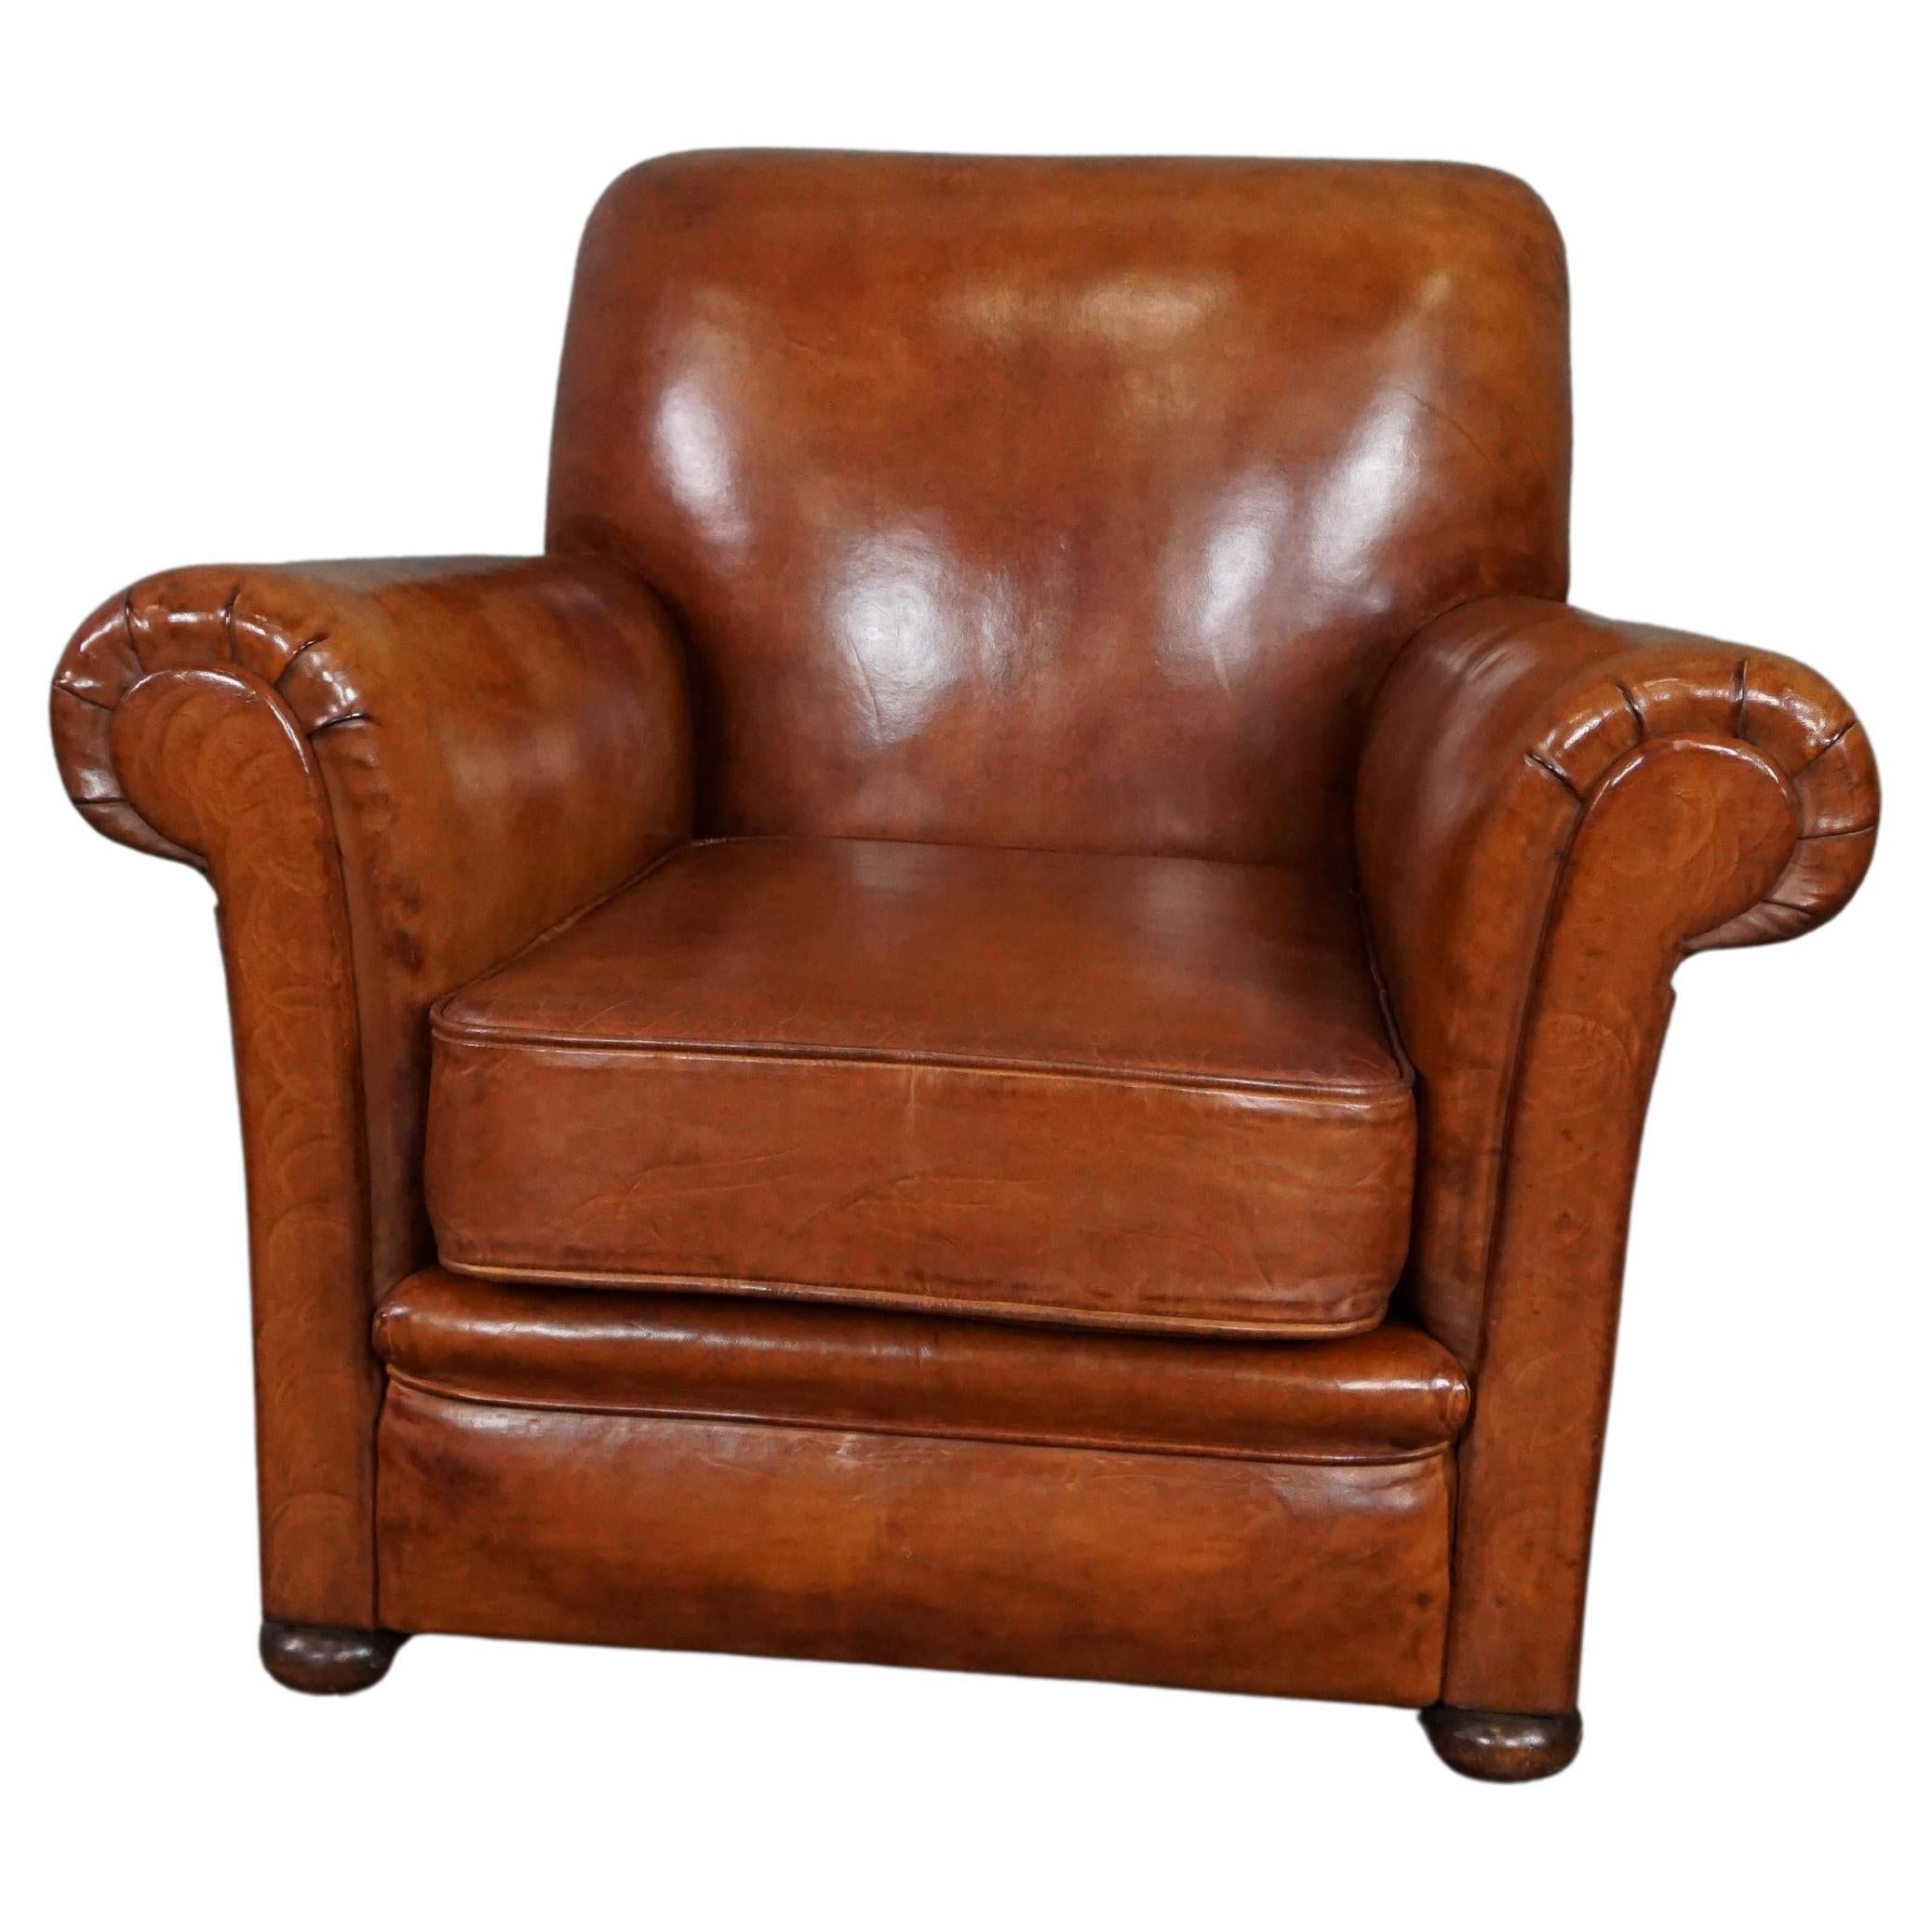 Very exclusive newly upholstered old sheep leather armchair